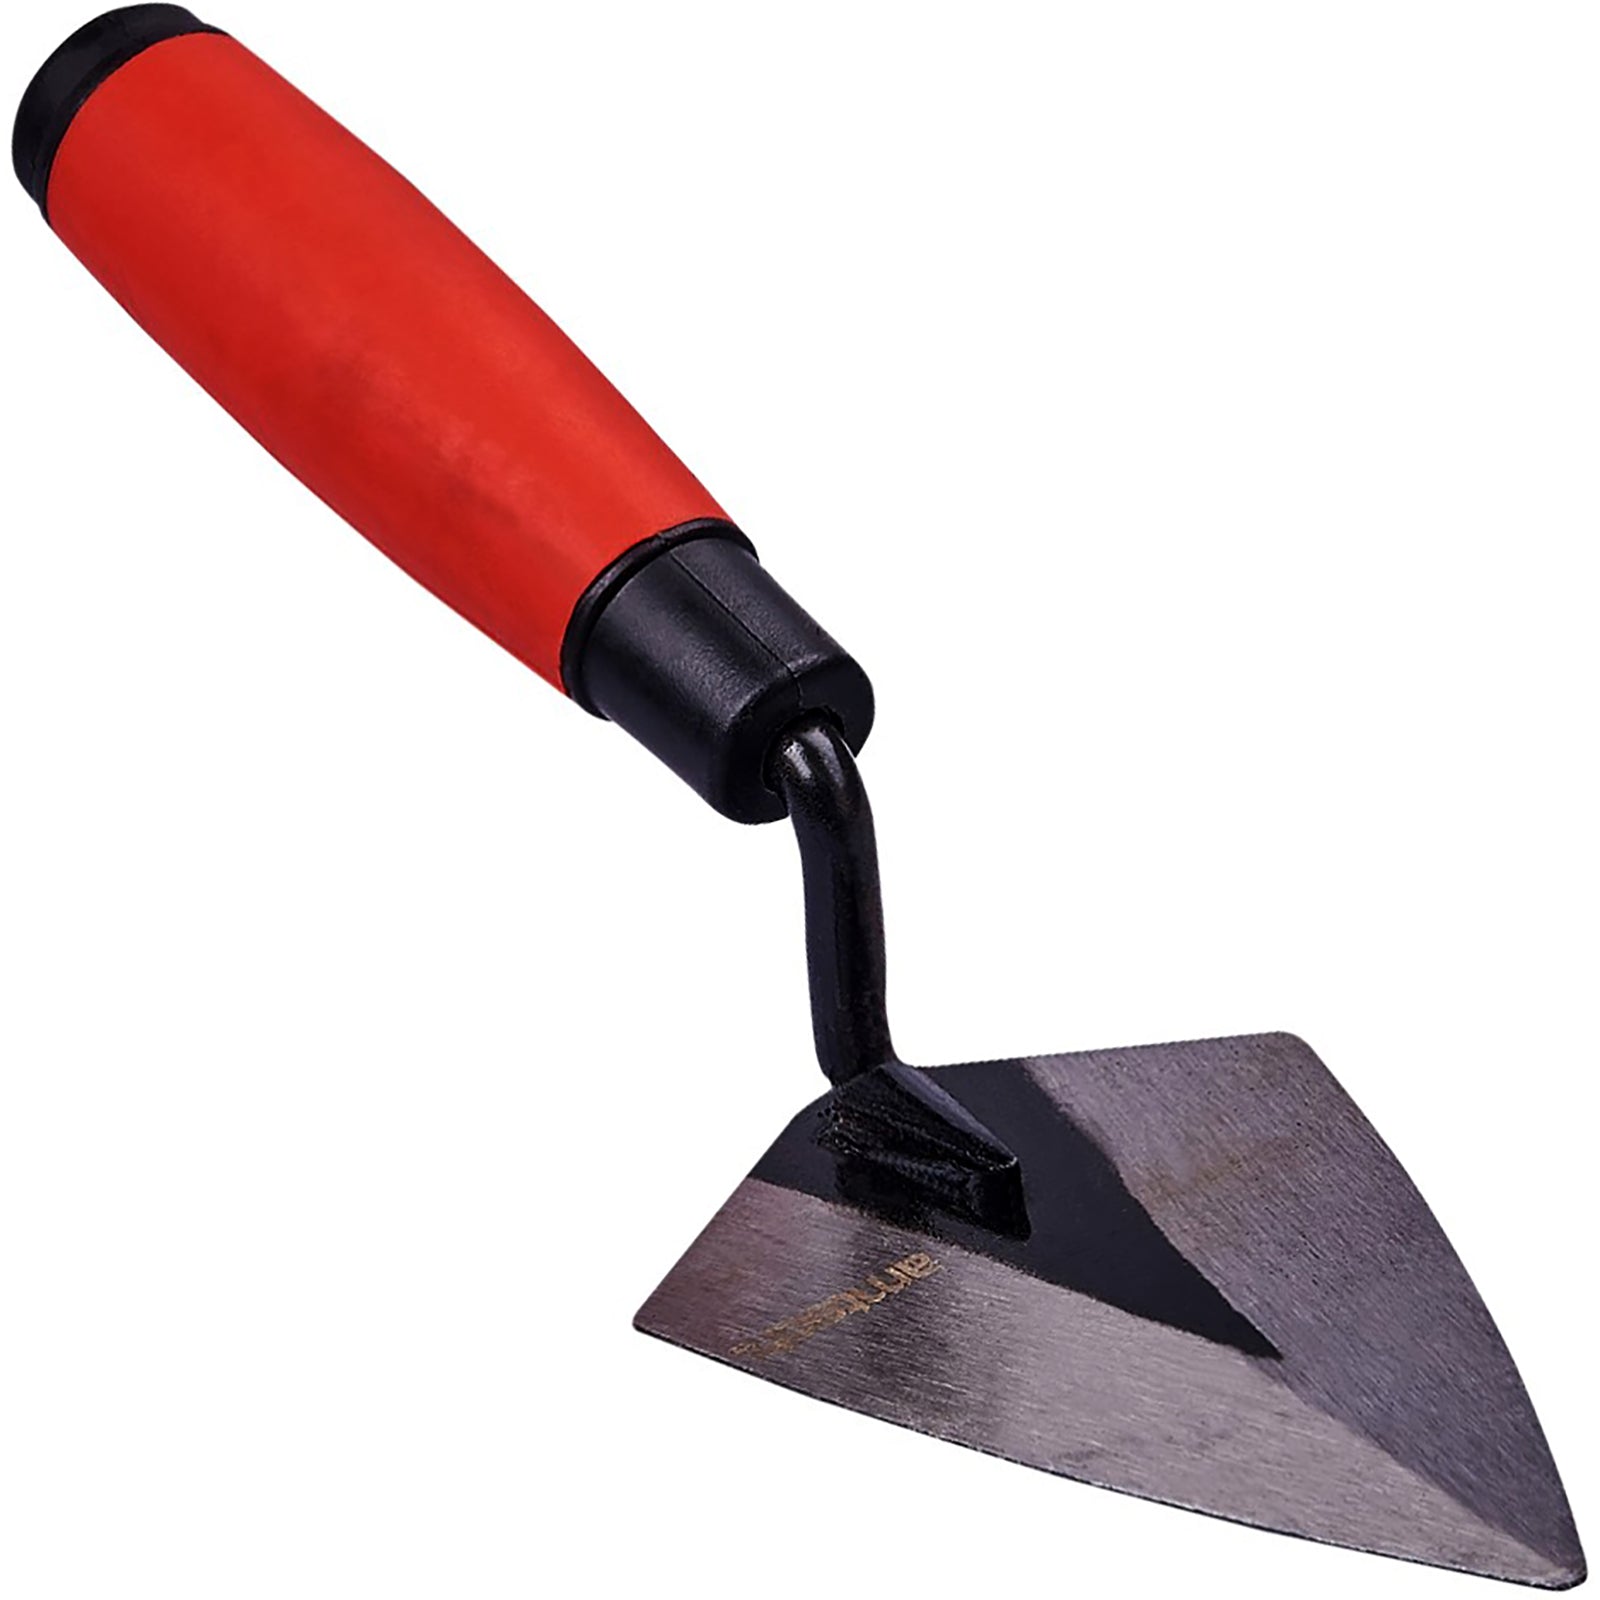 Amtech 125mm (5") Pointing Trowel with Soft Grip Handle